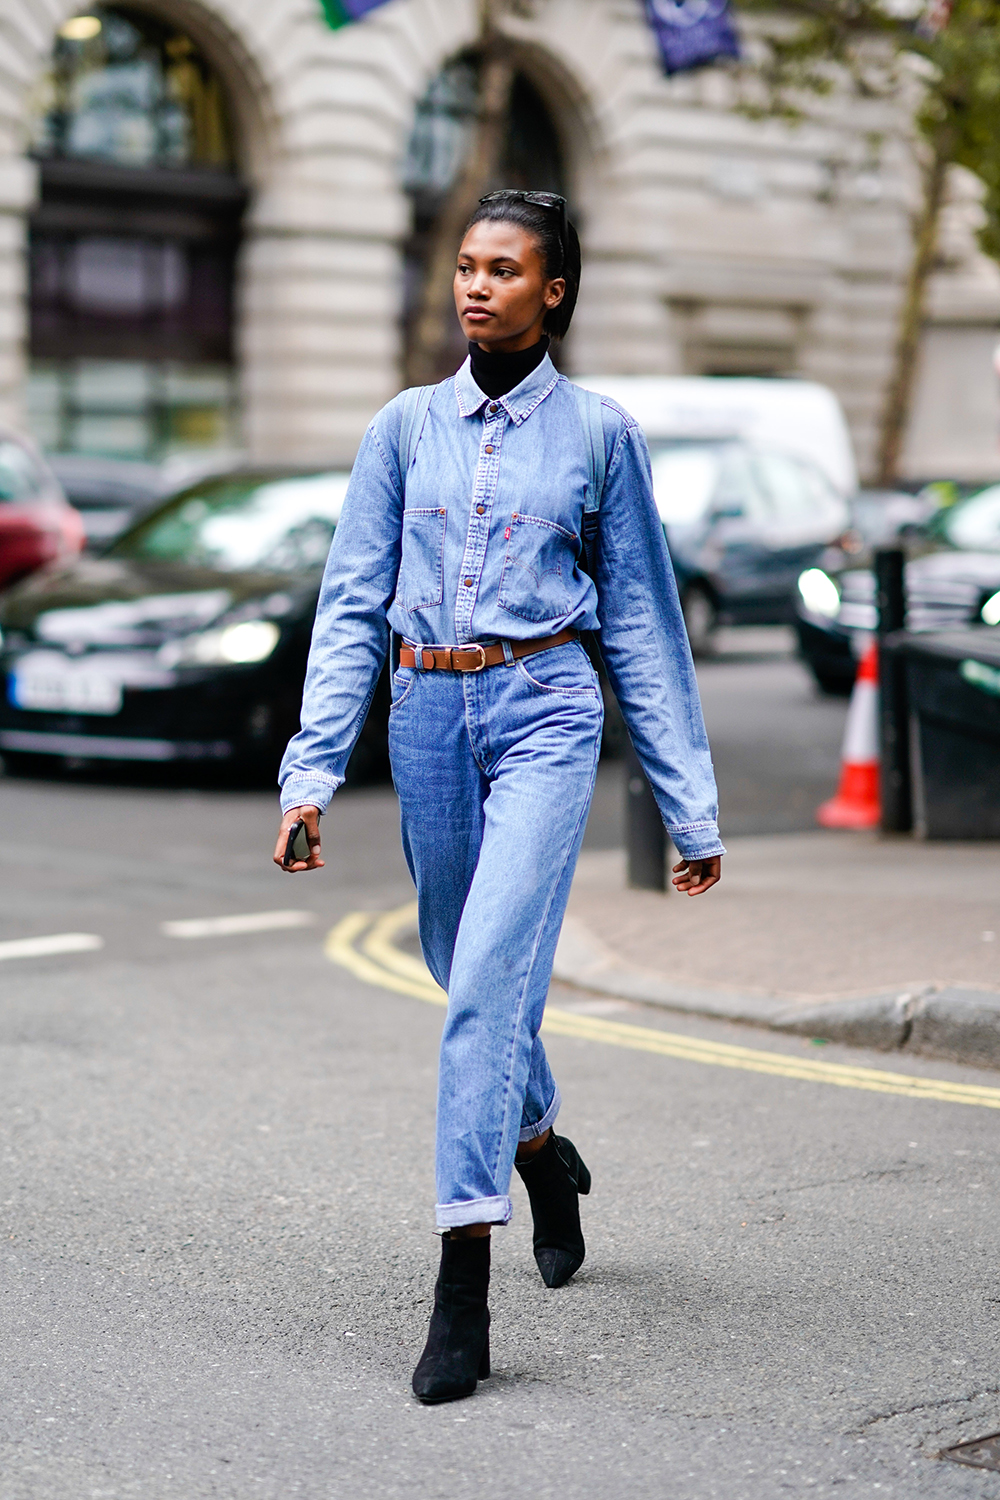 A model wears a blue denim shirt, a brown leather belt, cropped pants, black shoes, during London Fashion Week September 2018 on September 14, 2018 in London, England. (Photo by Edward Berthelot/Getty Images)